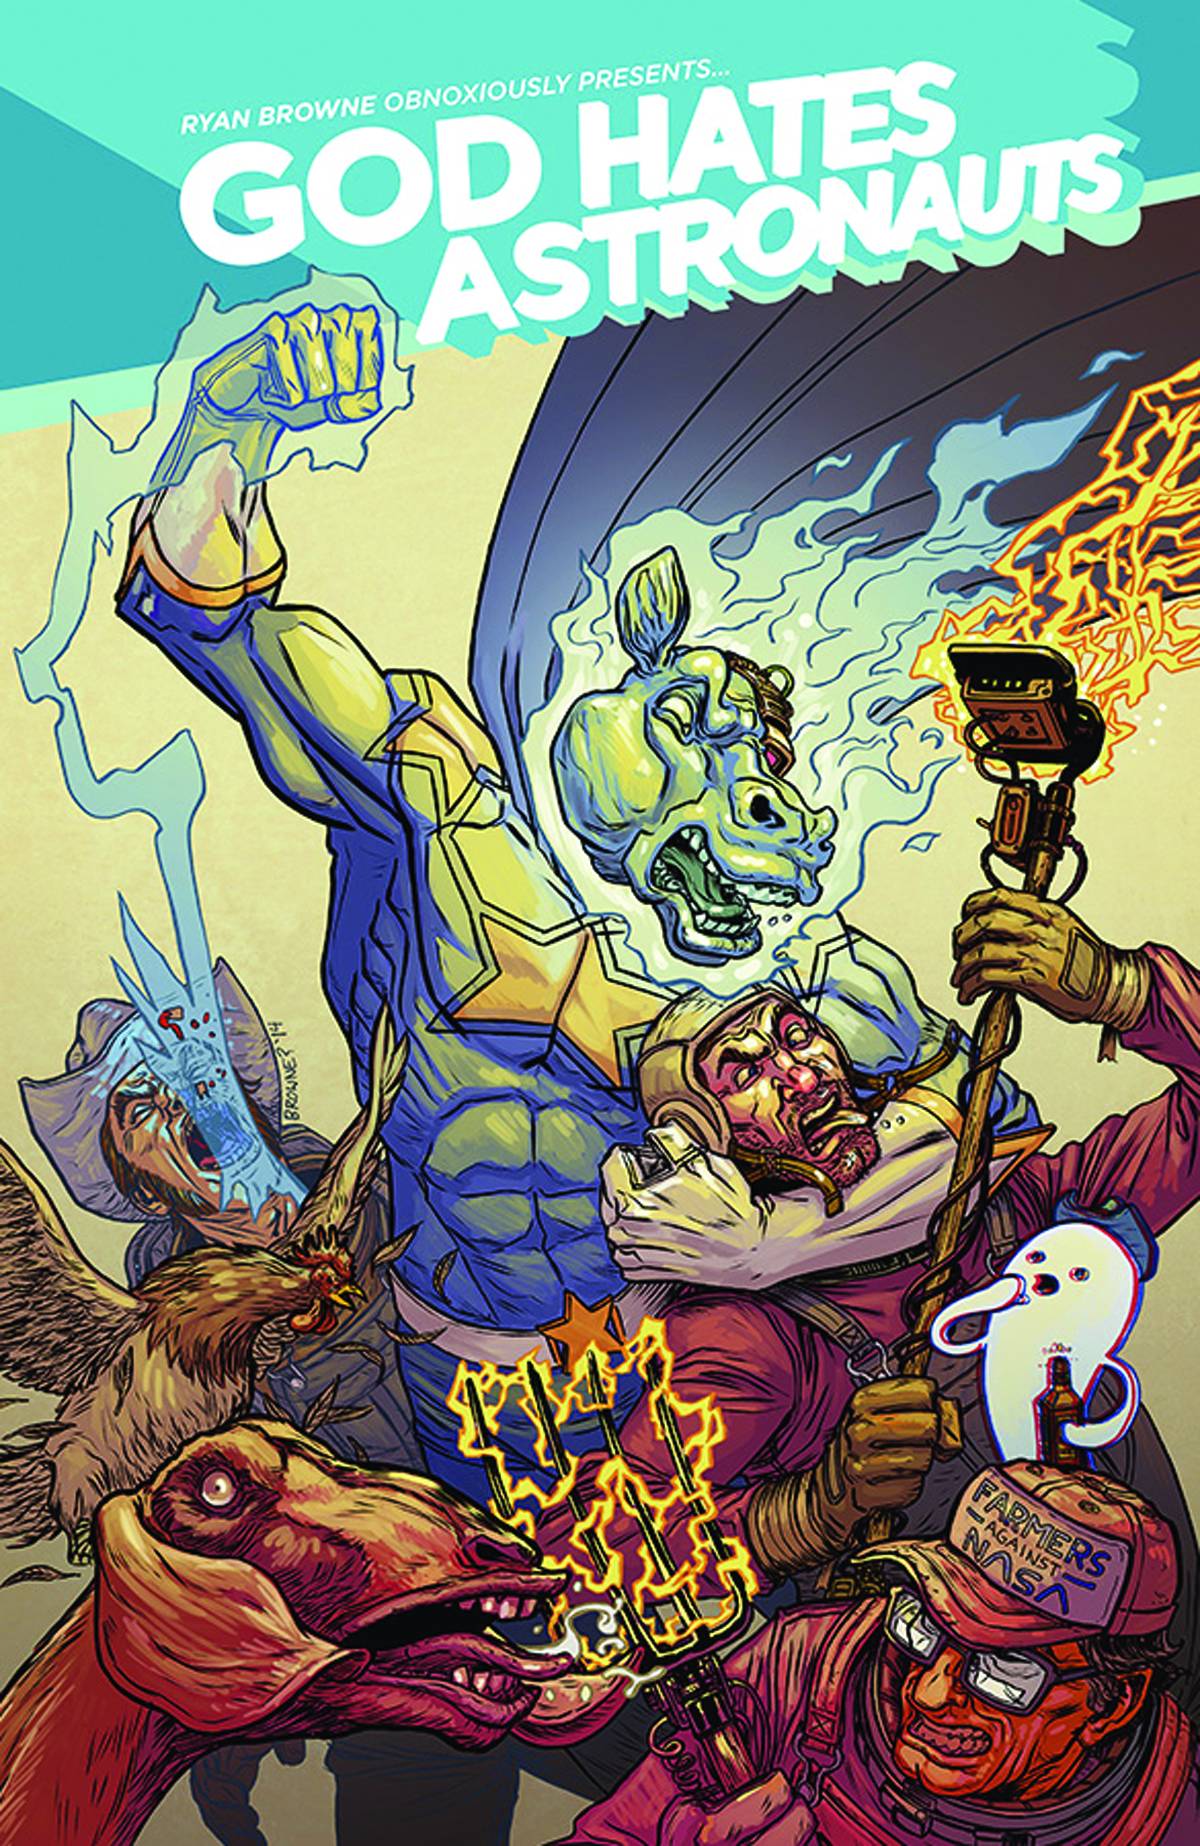 God Hates Astronauts #1 Cover A Browne